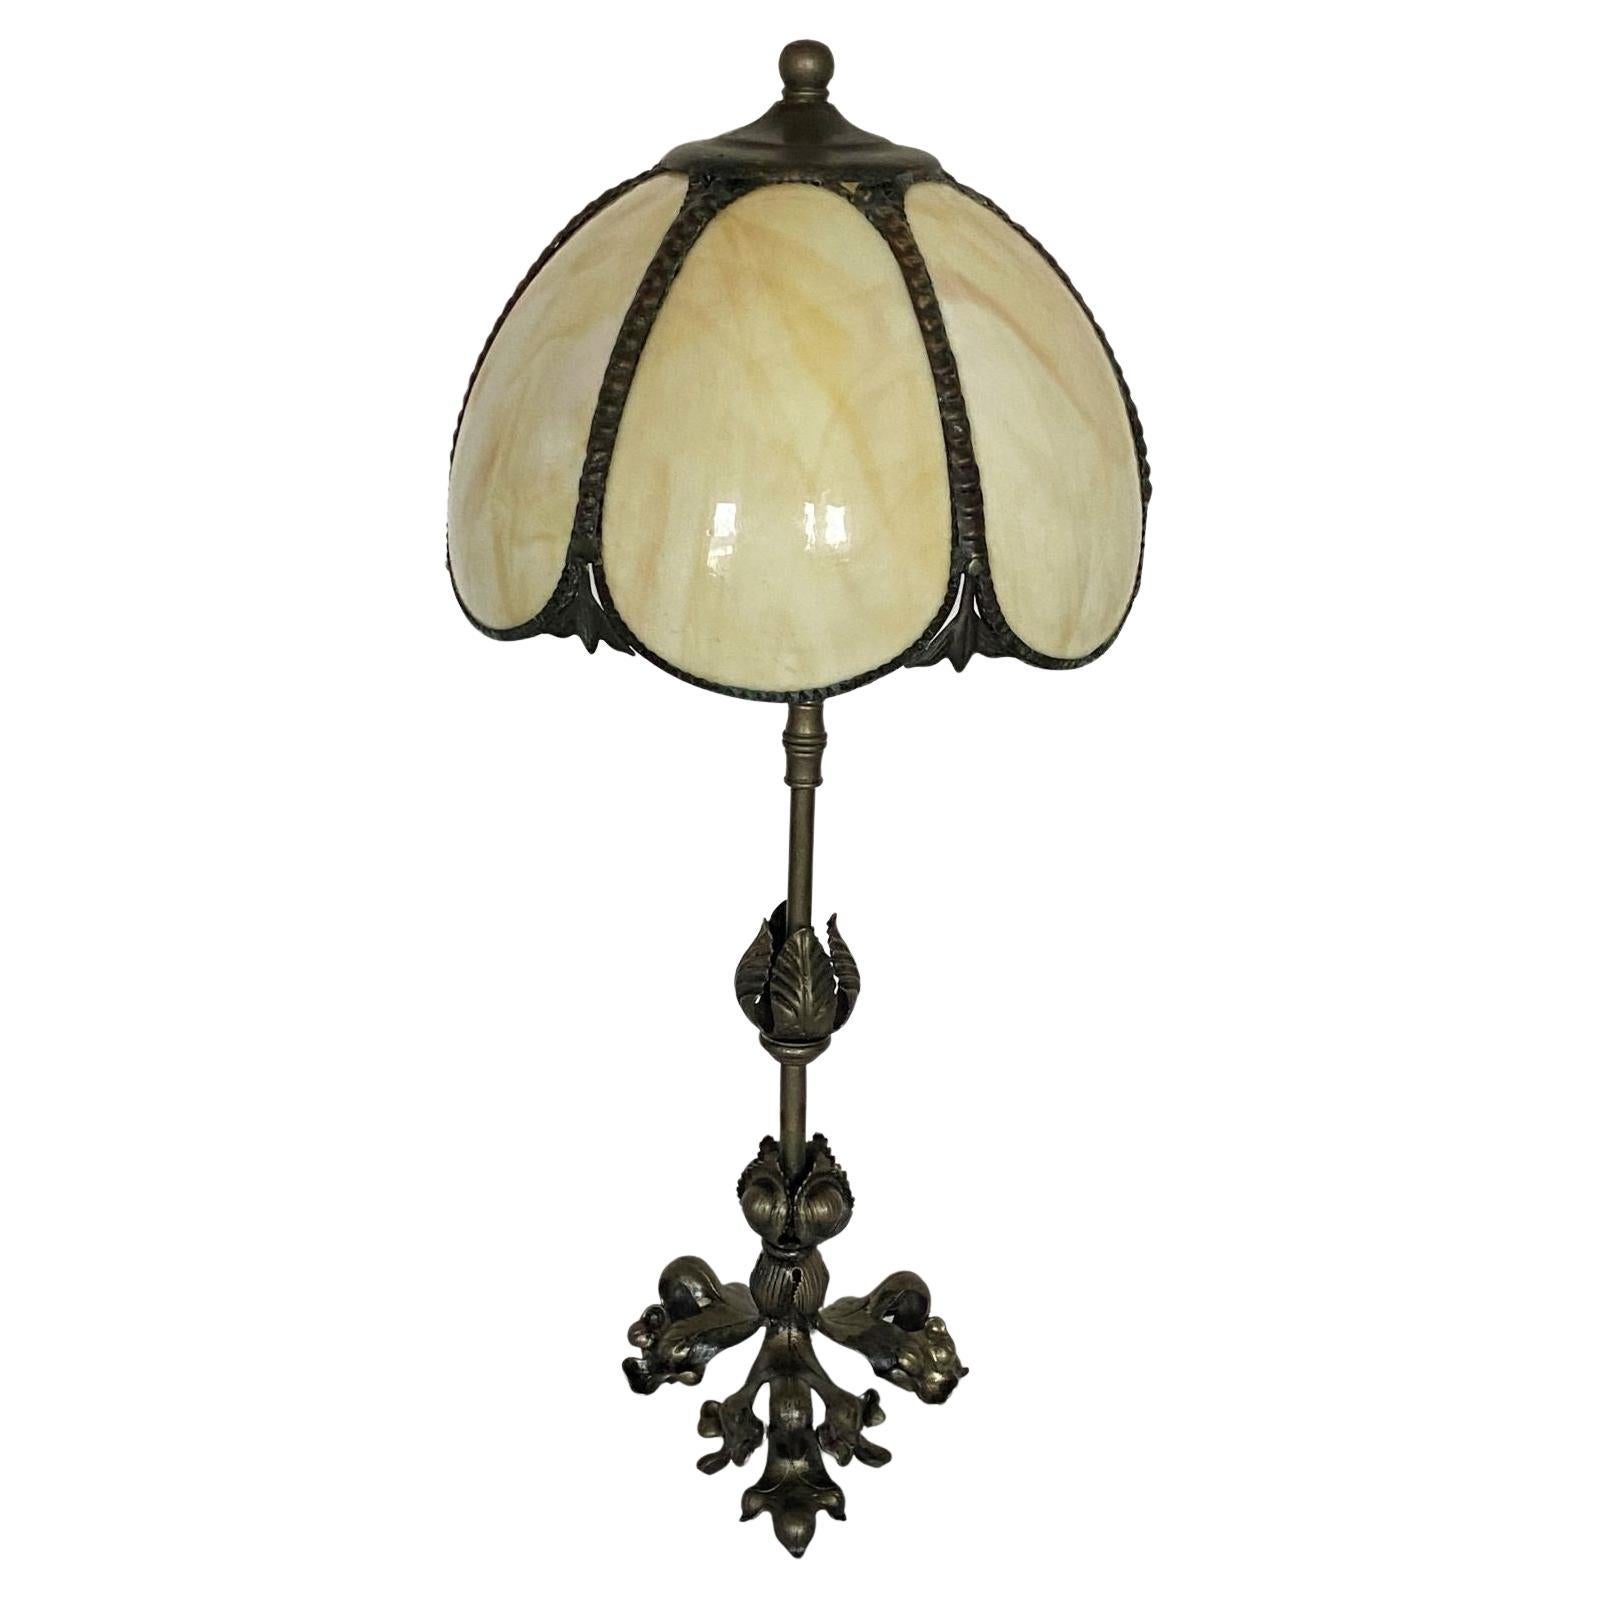 Art Deco Table Lamp Wrought Iron with Bent Slag Glass Shade, France, 1930s